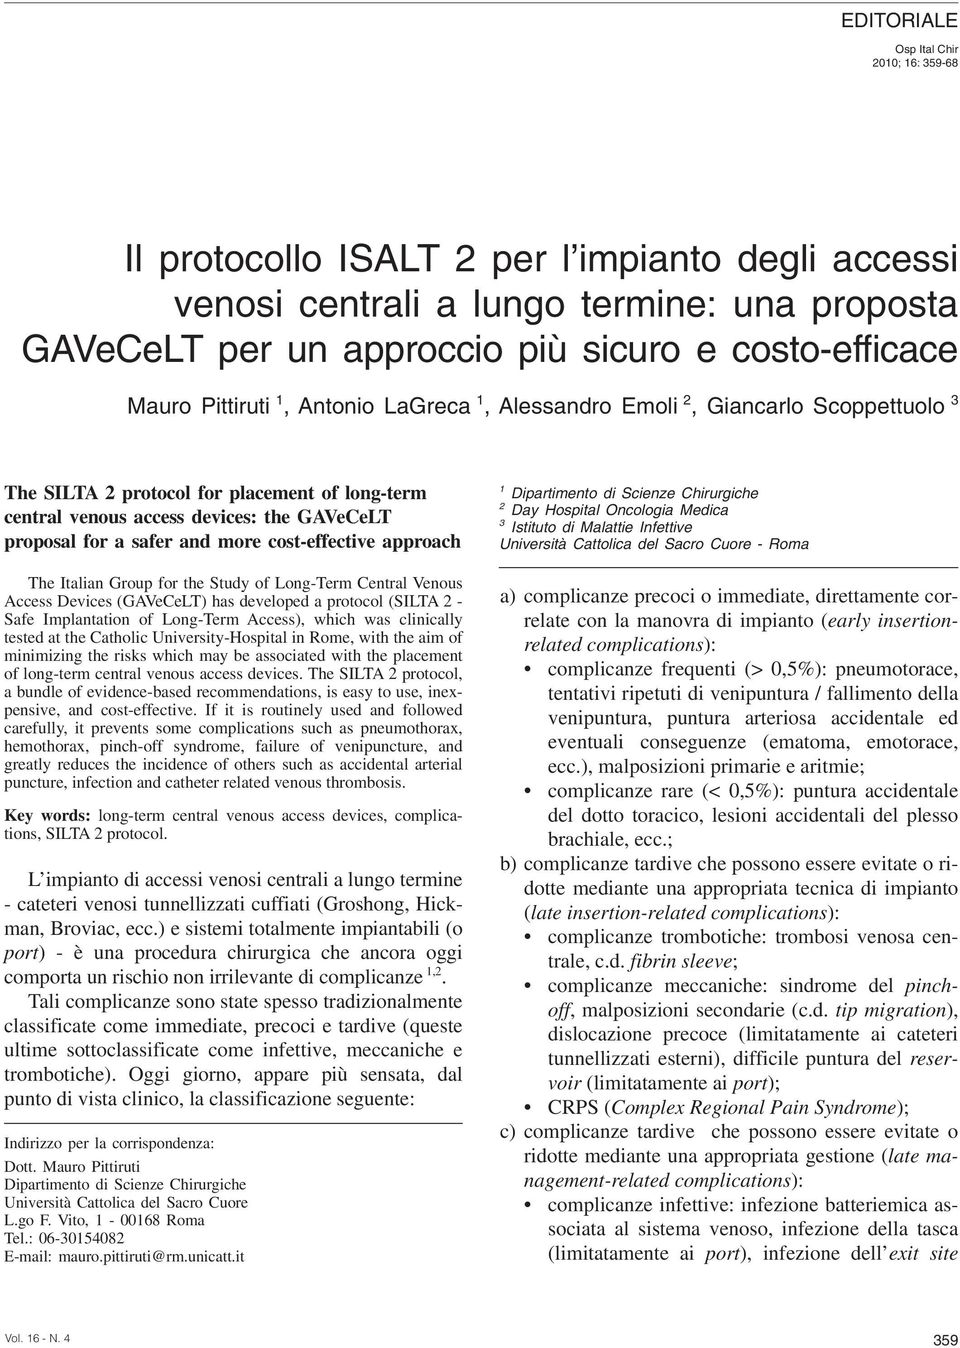 cost-effective approach The Italian Group for the Study of Long-Term Central Venous Access Devices (GAVeCeLT) has developed a protocol (SILTA 2 - Safe Implantation of Long-Term Access), which was